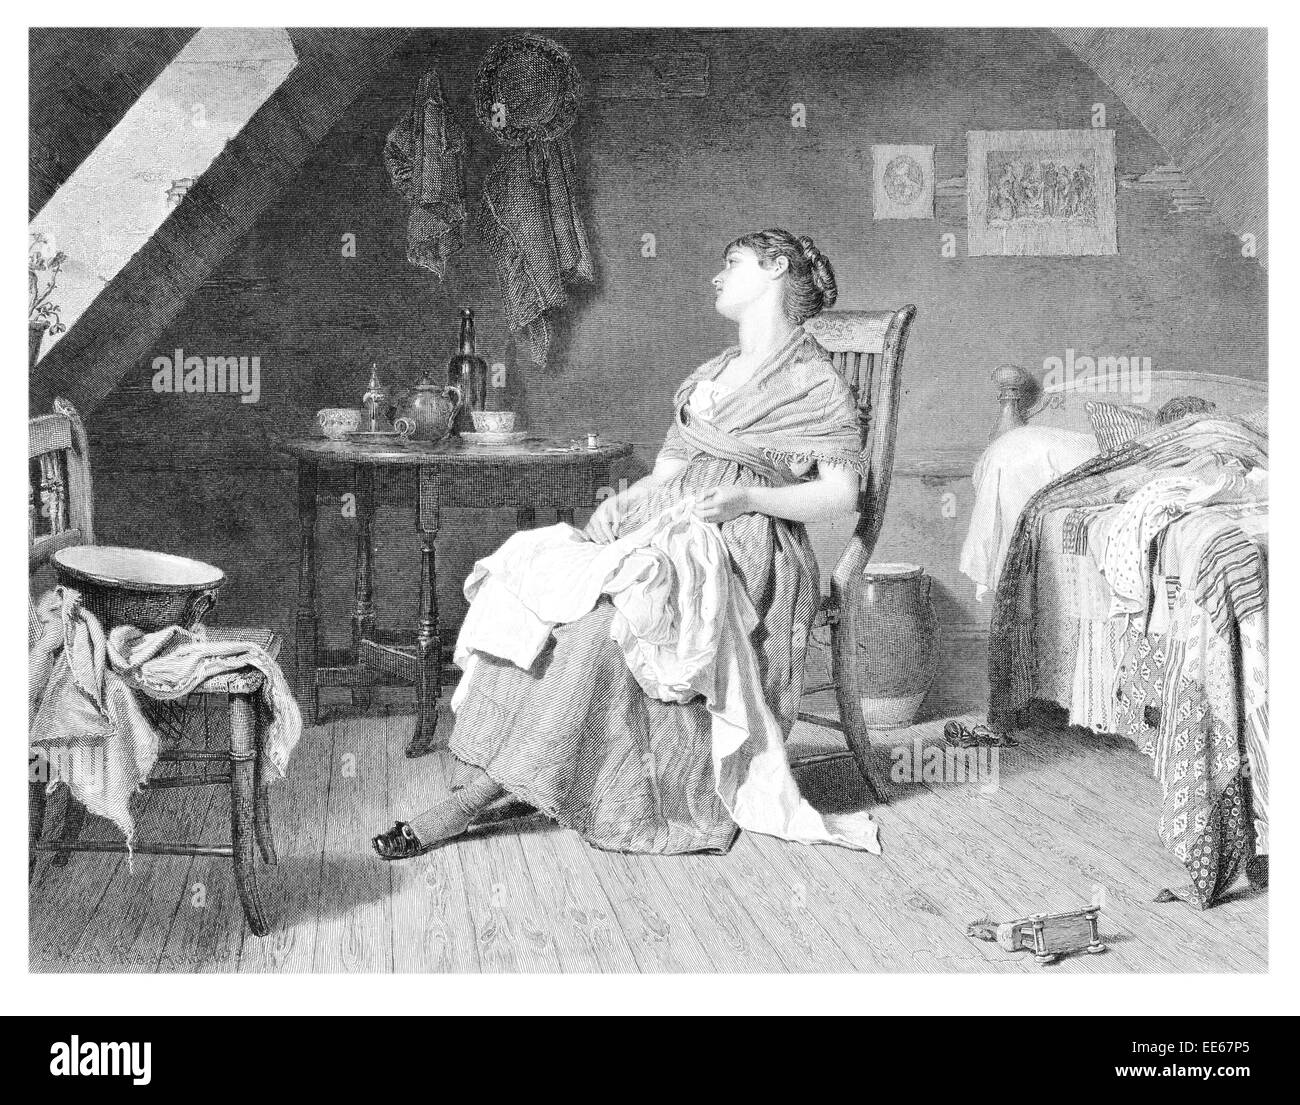 Weary E Radford tired worn out sleepy had enough fedup depressed depression period costume dress room bedroom chamber bed Stock Photo